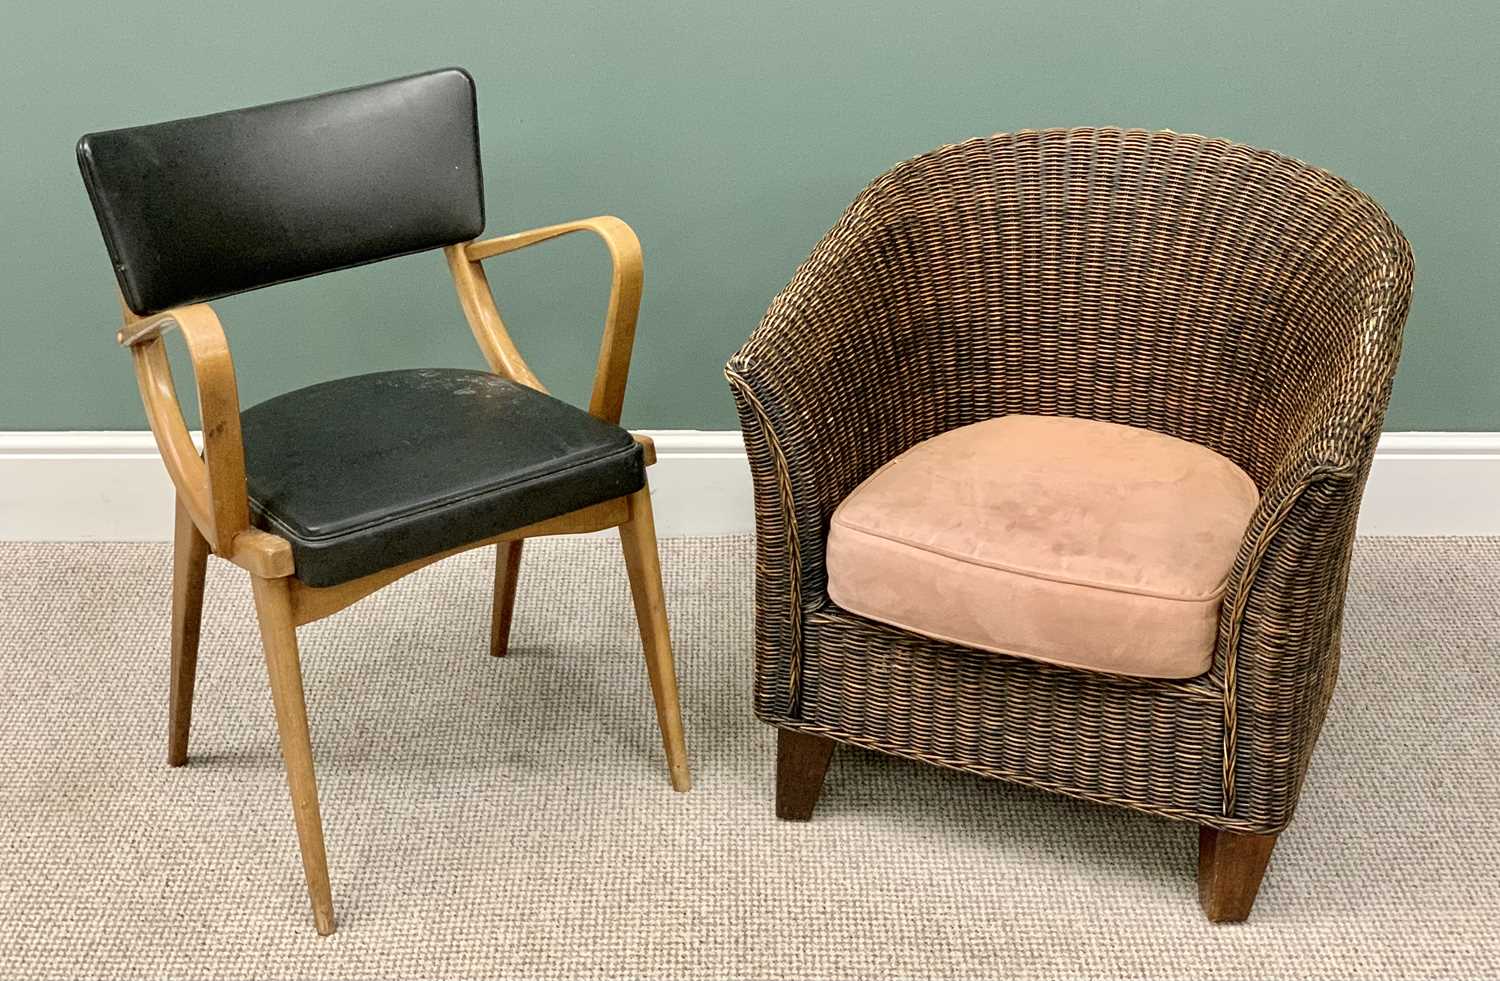 VINTAGE TYPE CHAIRS (2) - to include a bentwood style office type armchair, the curved back and seat